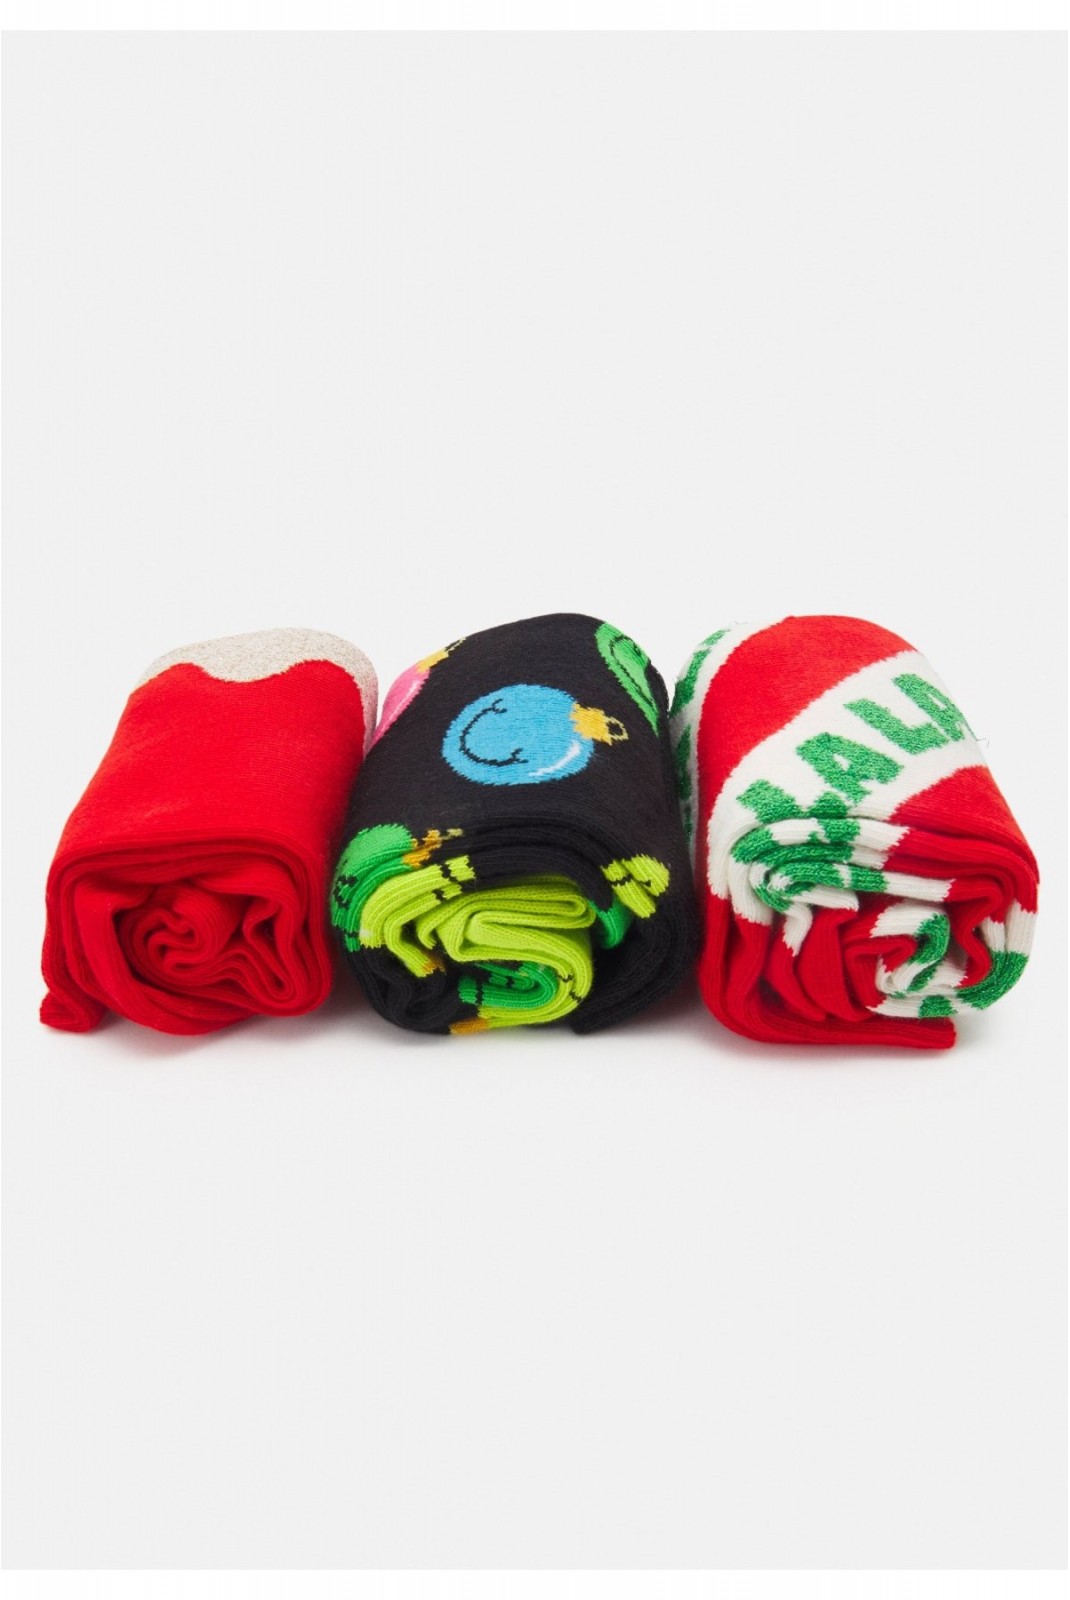 Coffret 3 paires chaussettes motifs Happy Socks Time for Holiday XTFH08-4300